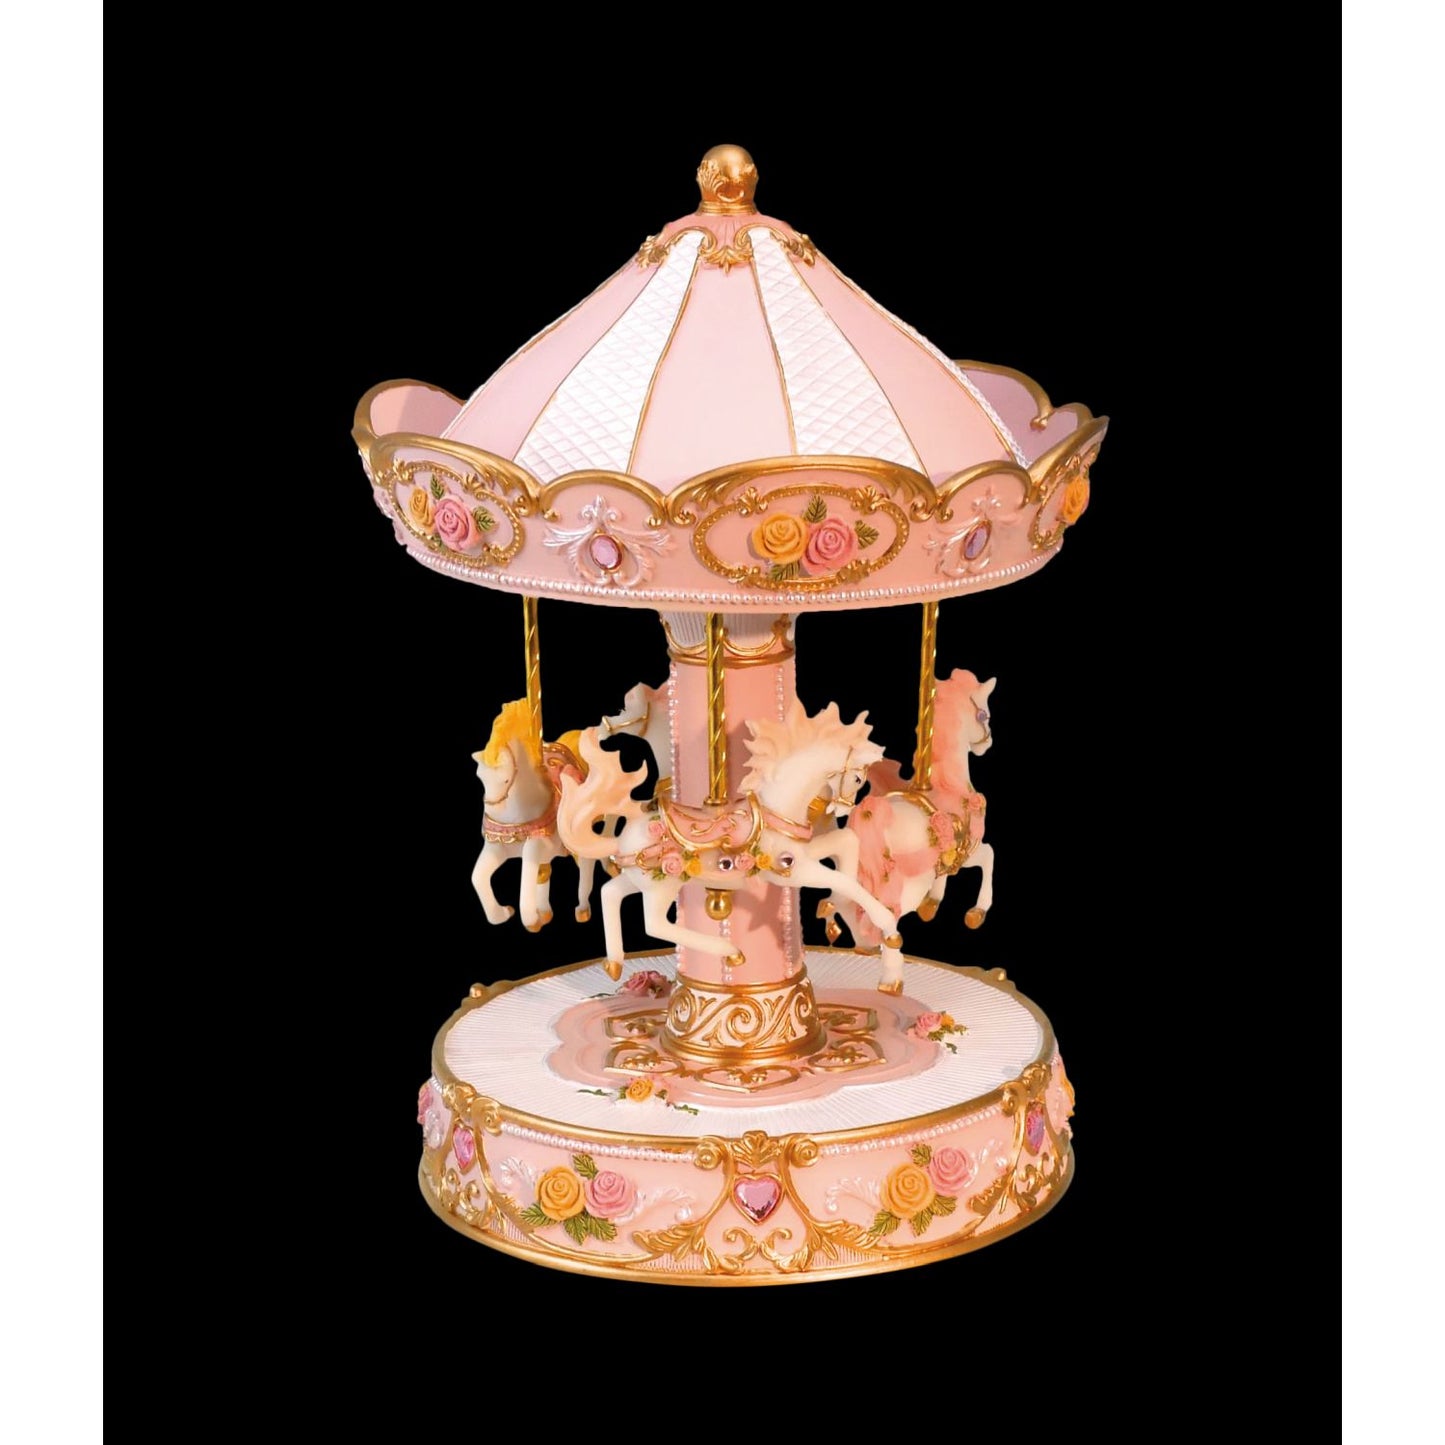 Musicbox Kingdom 10.4" Rose- And White-Colored Carousel